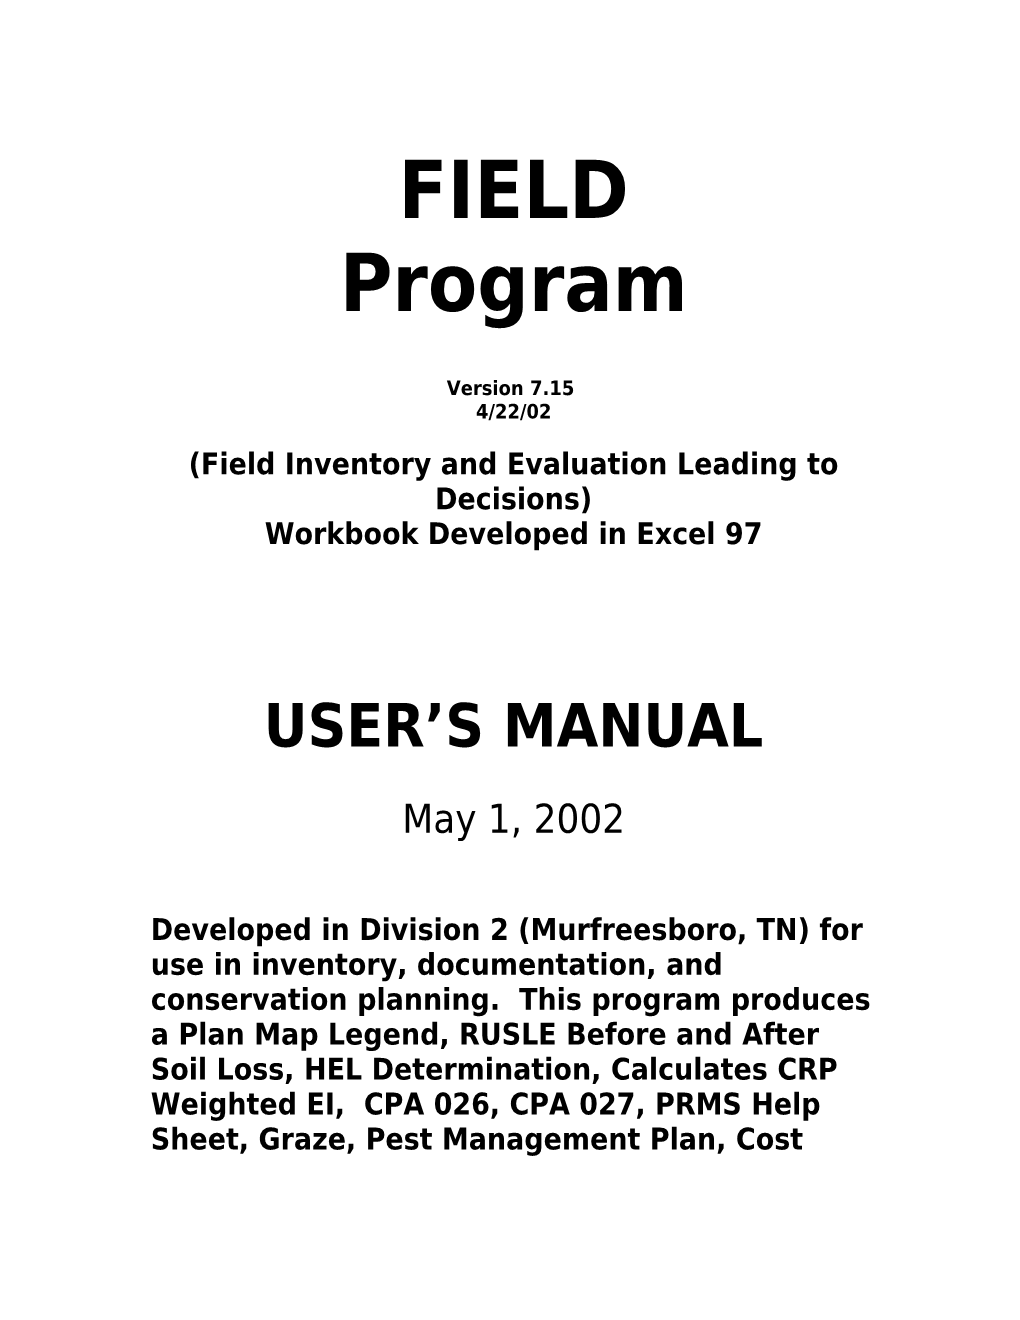 Instructions For Downloading The Files From The Floppy For Use In Your County: